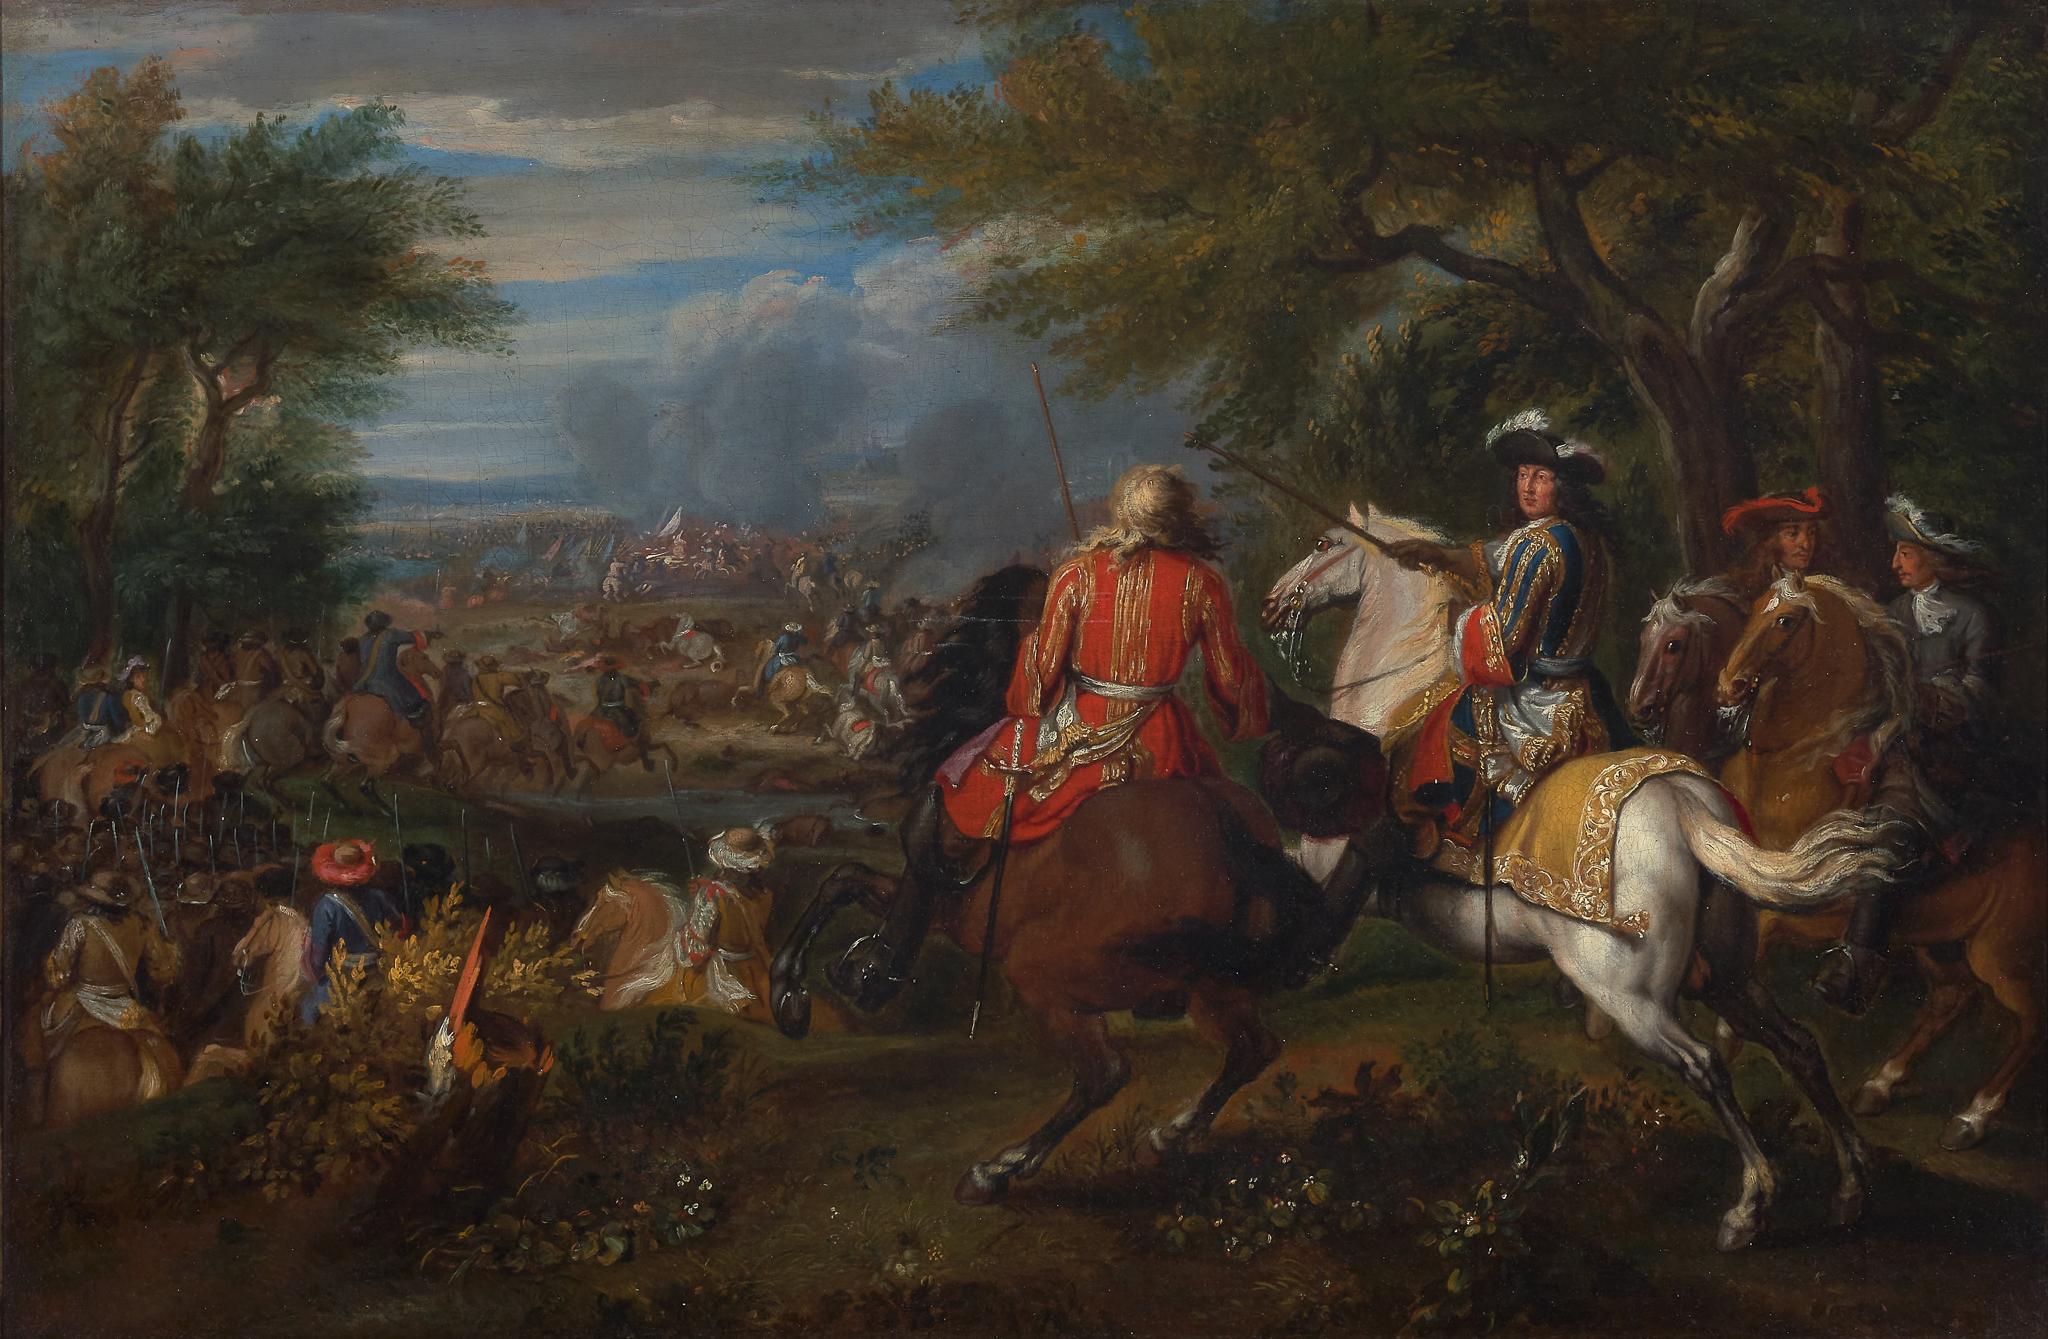 Louis XIV - the Sun King - at the battle of the canal of Bruges